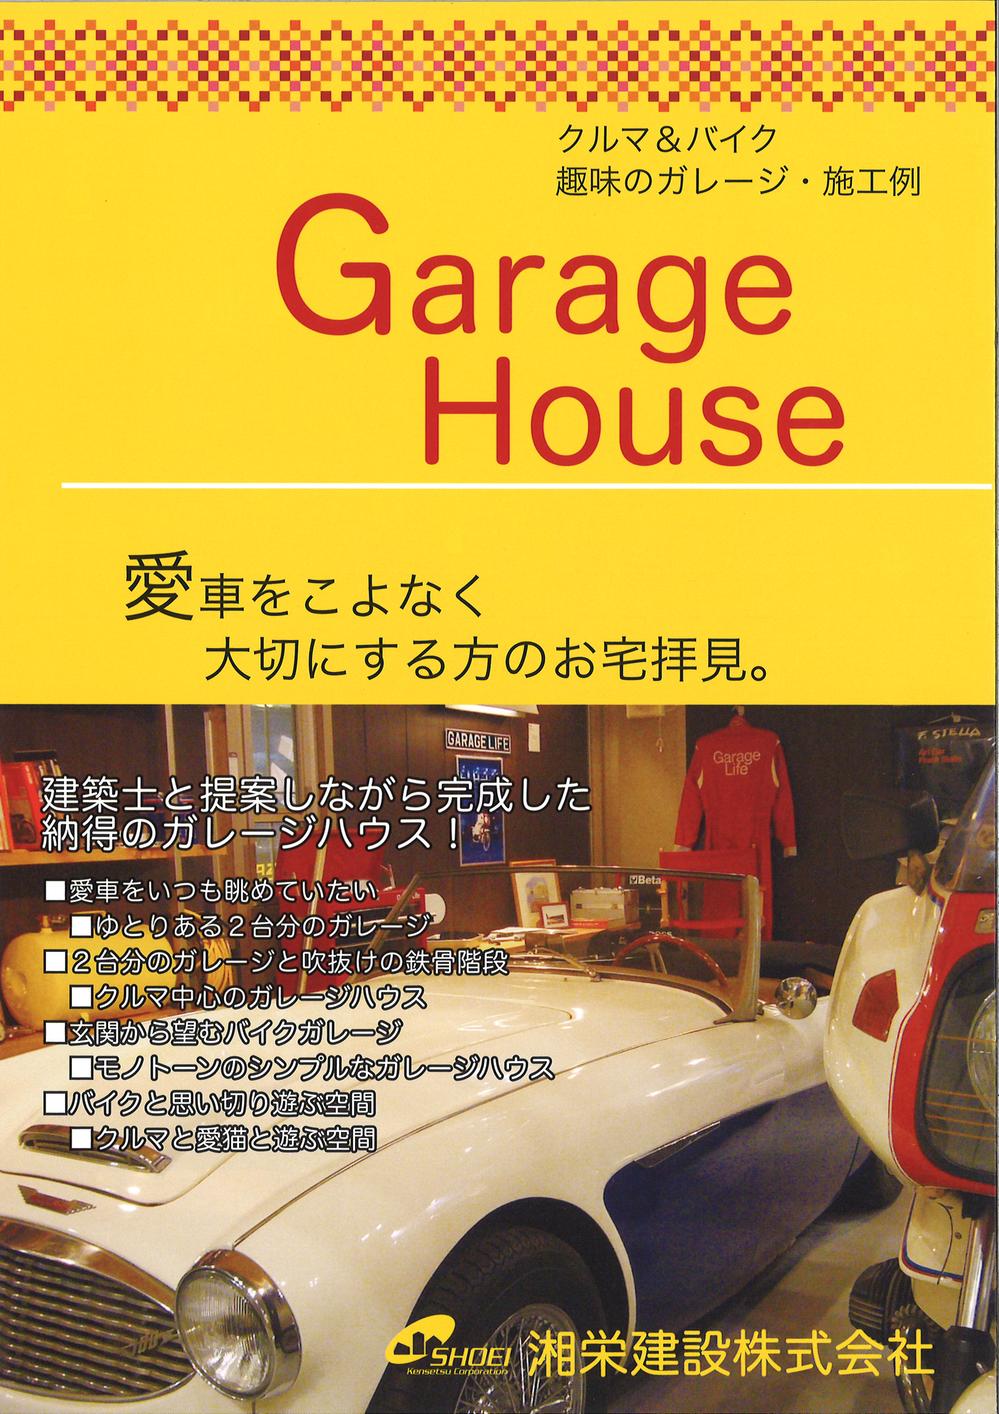 You will receive this brochure. Free design house of our construction Will be mailed entitled to the garage house hen there is also other Hawaiian style knitted to fit the Shonan. Please to claim hesitate to document!